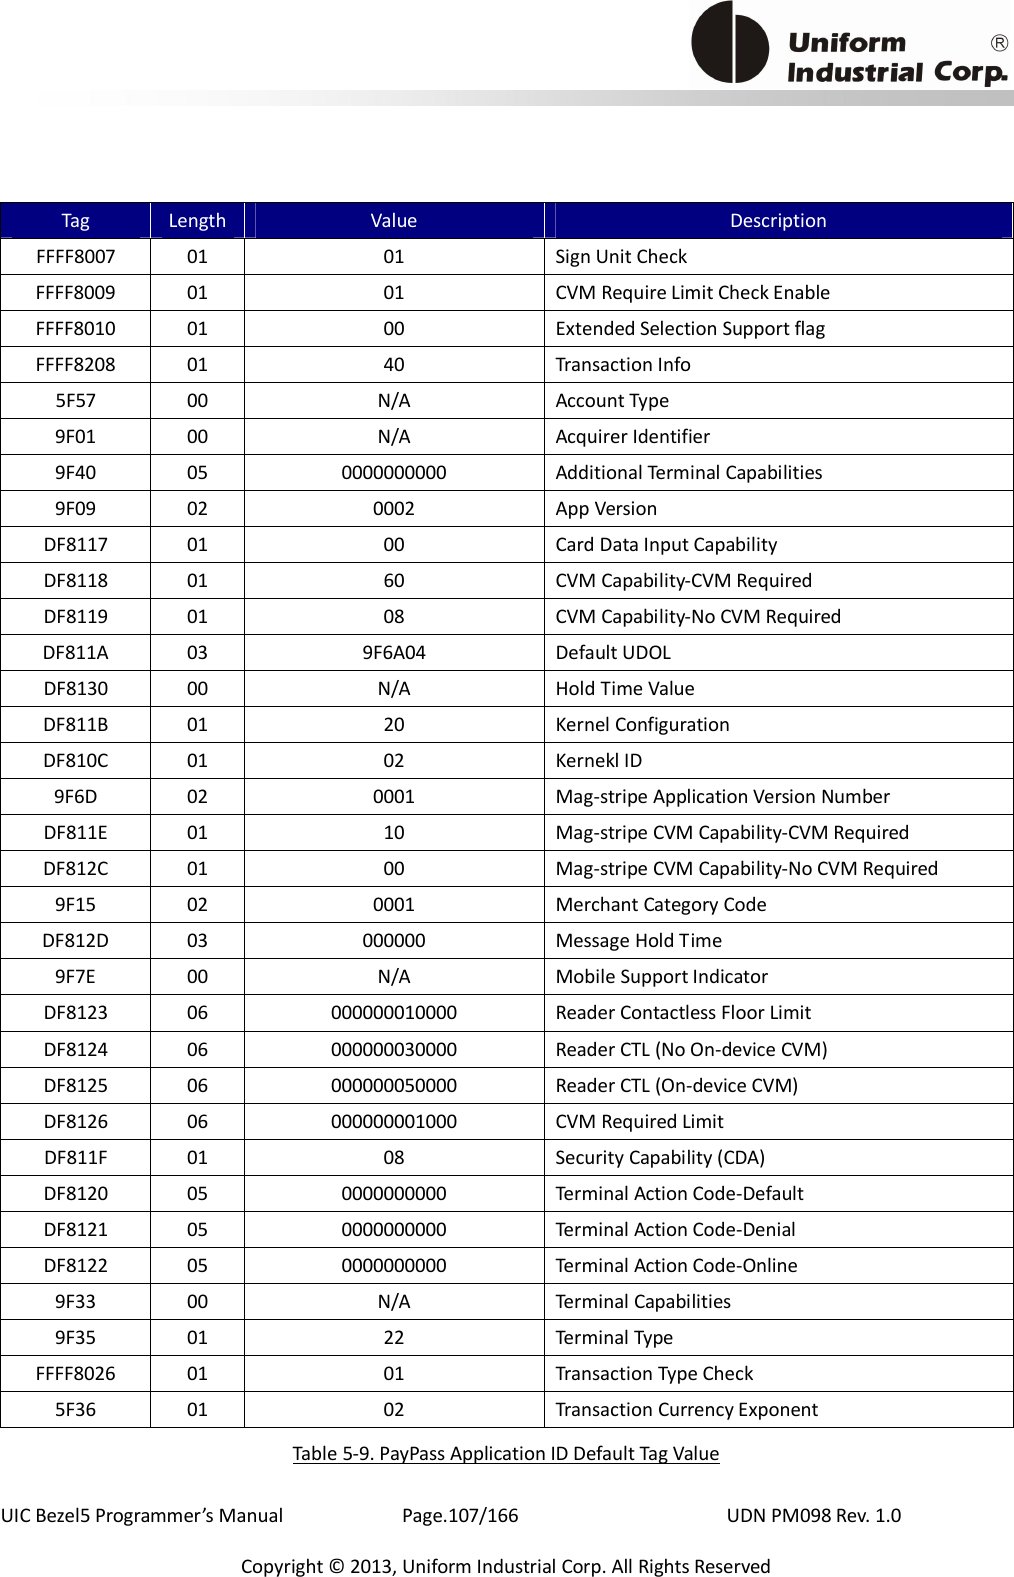                                           UIC Bezel5 Programmer’s Manual      Page.107/166                    UDN PM098 Rev. 1.0 Copyright © 2013, Uniform Industrial Corp. All Rights Reserved Tag  Length Value  Description FFFF8007  01  01  Sign Unit Check FFFF8009  01  01  CVM Require Limit Check Enable FFFF8010  01  00  Extended Selection Support flag FFFF8208  01  40  Transaction Info 5F57  00  N/A  Account Type 9F01  00  N/A  Acquirer Identifier 9F40  05  0000000000  Additional Terminal Capabilities 9F09  02  0002  App Version DF8117  01  00  Card Data Input Capability DF8118  01  60  CVM Capability-CVM Required DF8119  01  08  CVM Capability-No CVM Required DF811A  03  9F6A04  Default UDOL DF8130  00  N/A  Hold Time Value DF811B  01  20  Kernel Configuration DF810C  01  02  Kernekl ID 9F6D  02  0001  Mag-stripe Application Version Number DF811E  01  10  Mag-stripe CVM Capability-CVM Required DF812C  01  00  Mag-stripe CVM Capability-No CVM Required 9F15  02  0001  Merchant Category Code DF812D  03  000000  Message Hold Time 9F7E  00  N/A  Mobile Support Indicator DF8123  06  000000010000  Reader Contactless Floor Limit DF8124  06  000000030000  Reader CTL (No On-device CVM) DF8125  06  000000050000  Reader CTL (On-device CVM) DF8126  06  000000001000  CVM Required Limit DF811F  01  08  Security Capability (CDA) DF8120  05  0000000000  Terminal Action Code-Default DF8121  05  0000000000  Terminal Action Code-Denial DF8122  05  0000000000  Terminal Action Code-Online 9F33  00  N/A  Terminal Capabilities 9F35  01  22  Terminal Type   FFFF8026  01  01  Transaction Type Check 5F36  01  02  Transaction Currency Exponent Table 5-9. PayPass Application ID Default Tag Value 